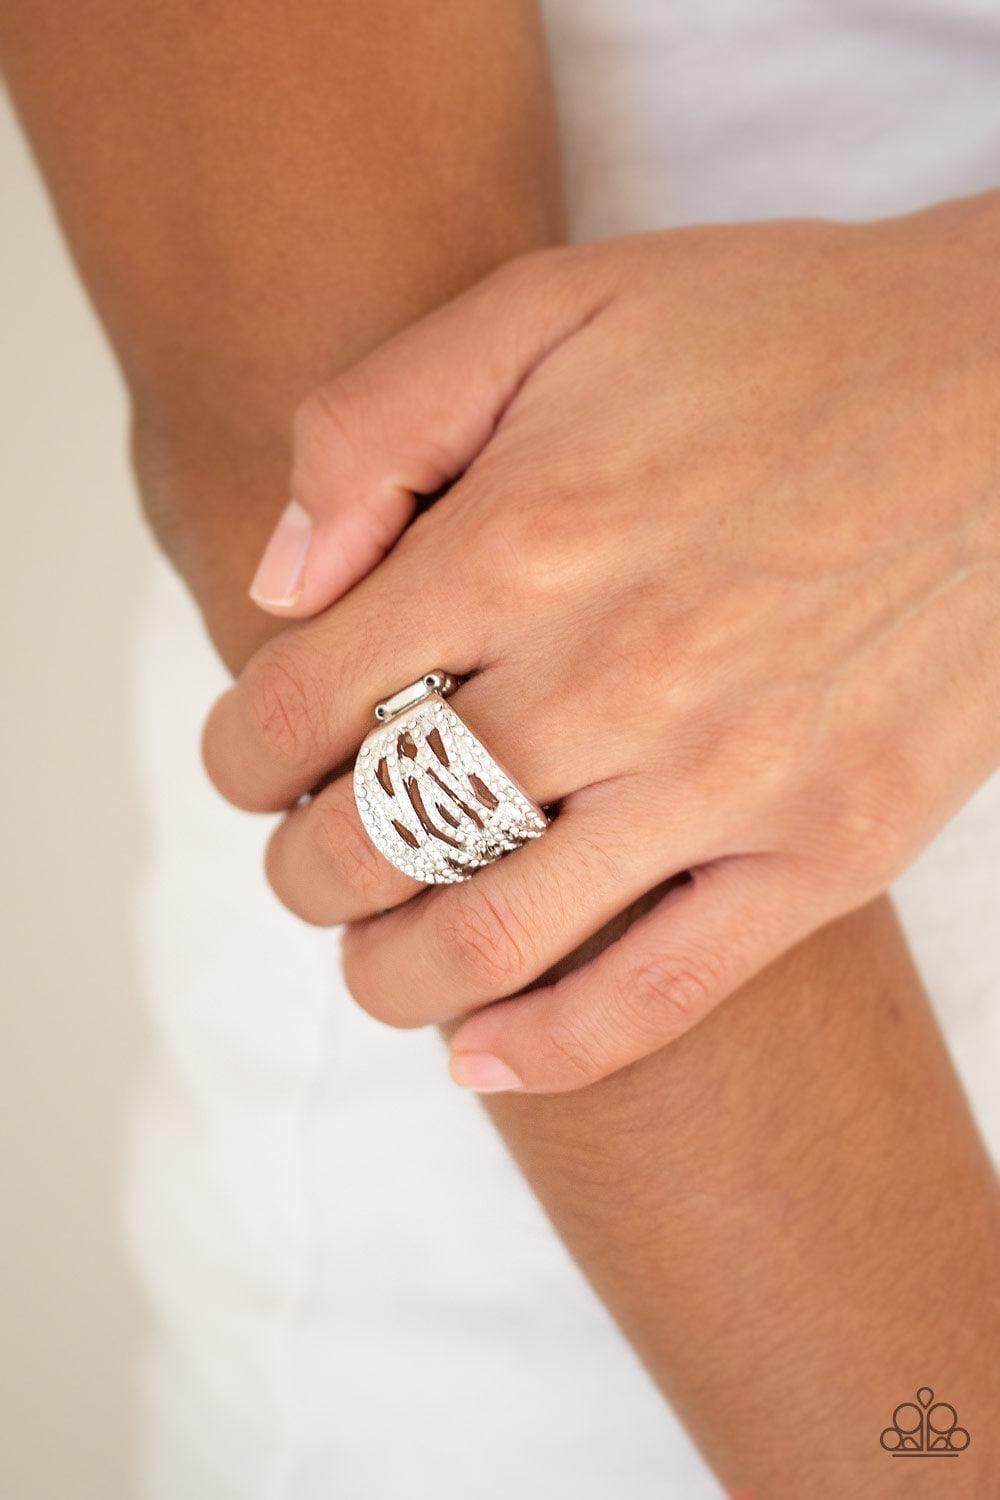 Paparazzi Accessories - The Money Maker - White Ring - Bling by JessieK